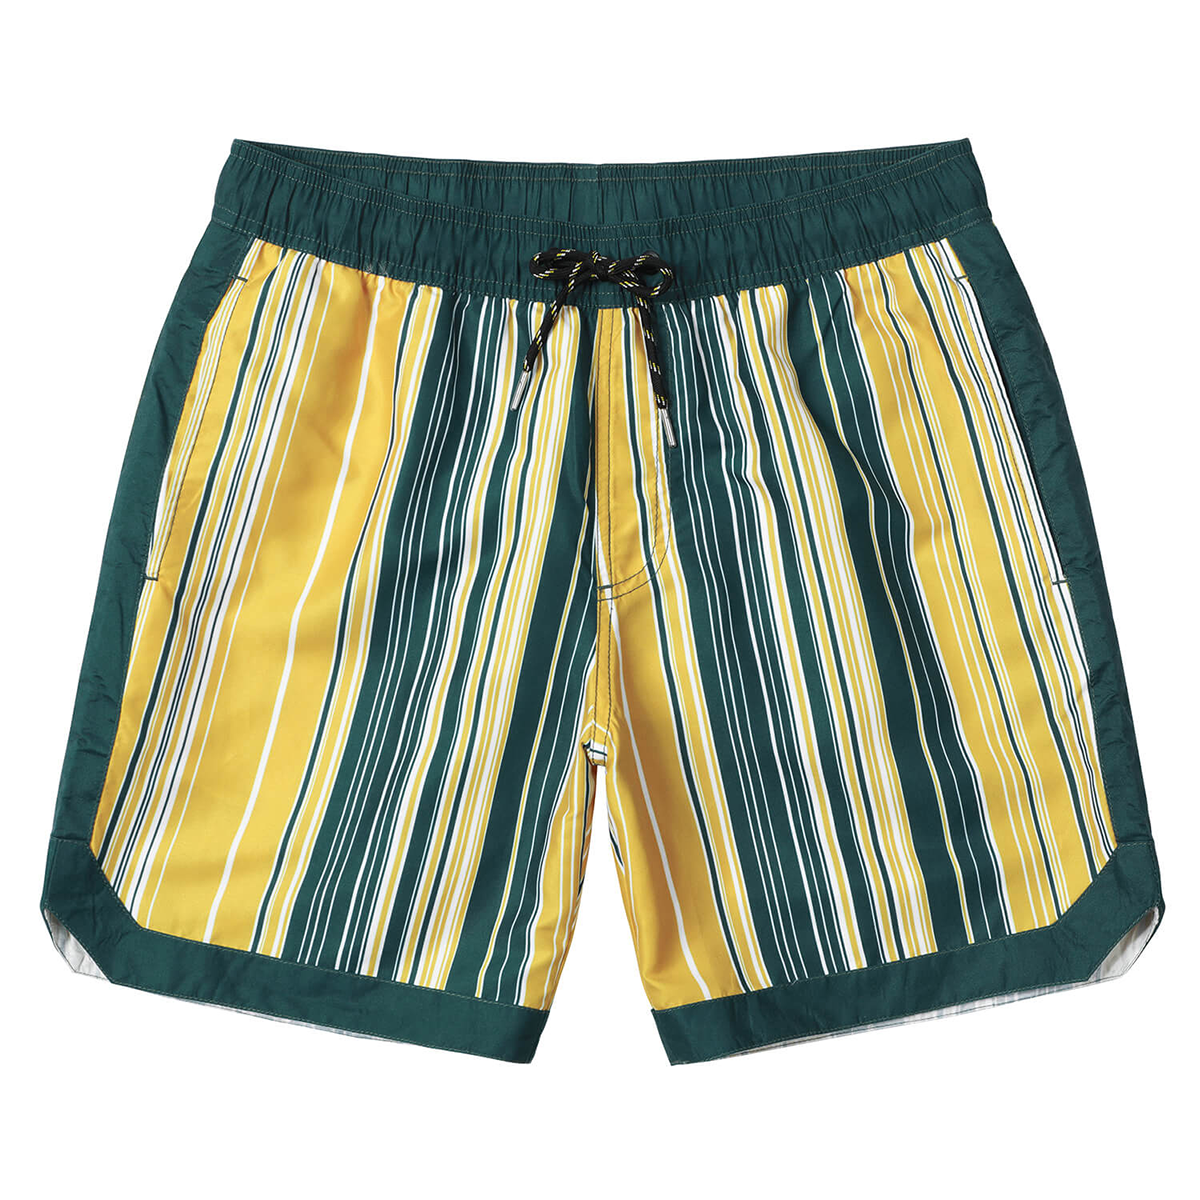 Men's Casual Quick Dry Summer Beach Swimming Trunks